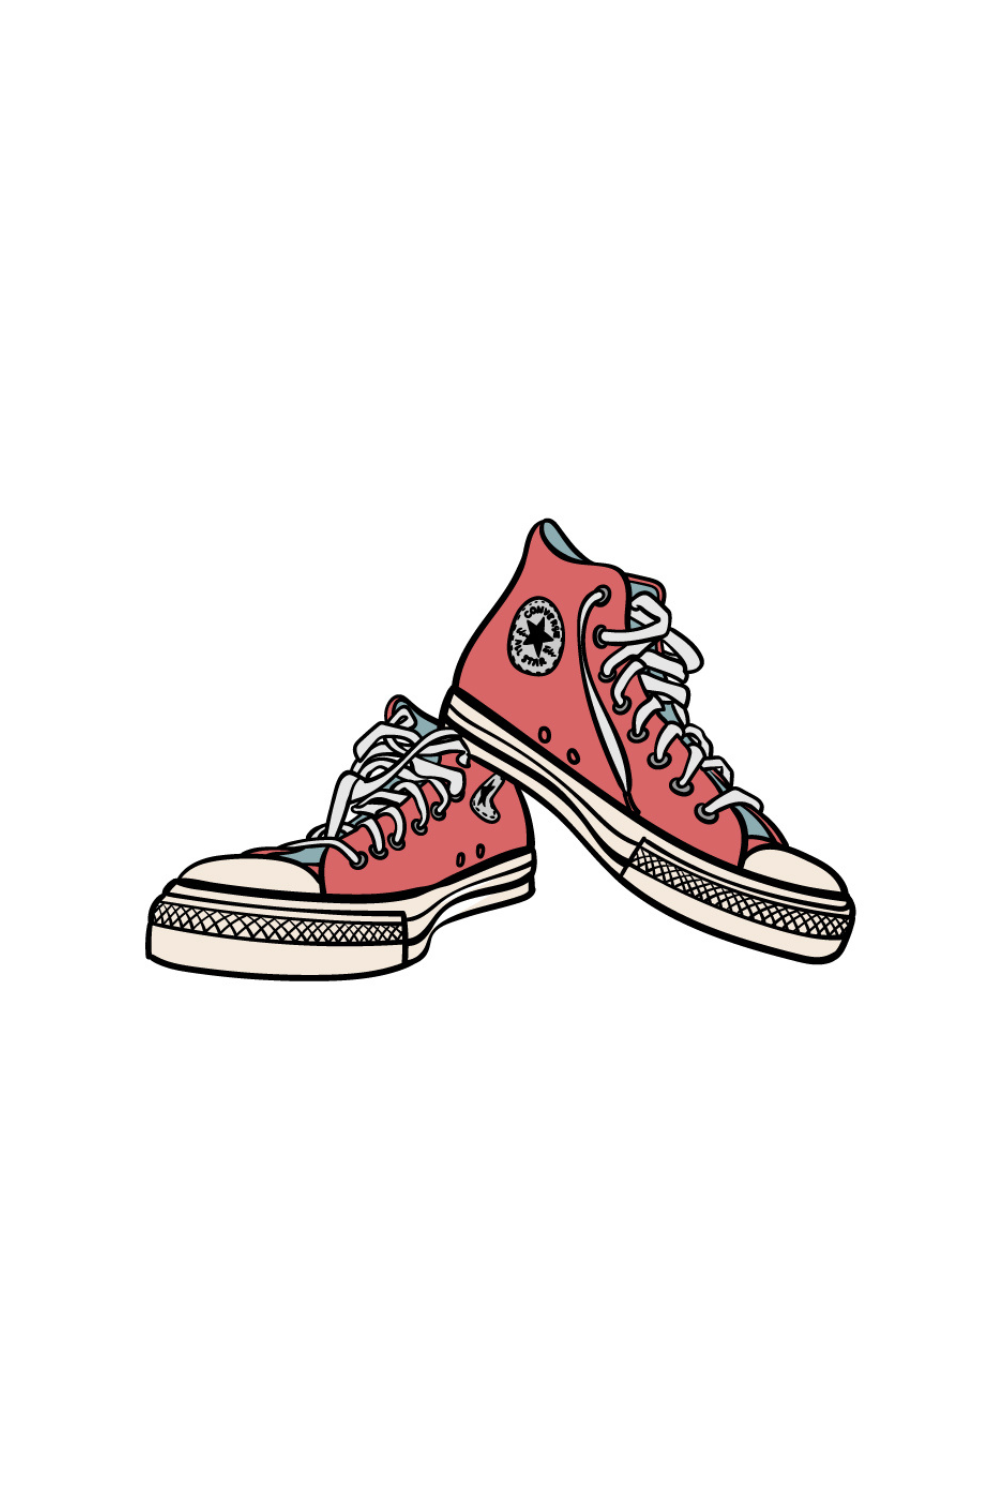 How to draw Converse